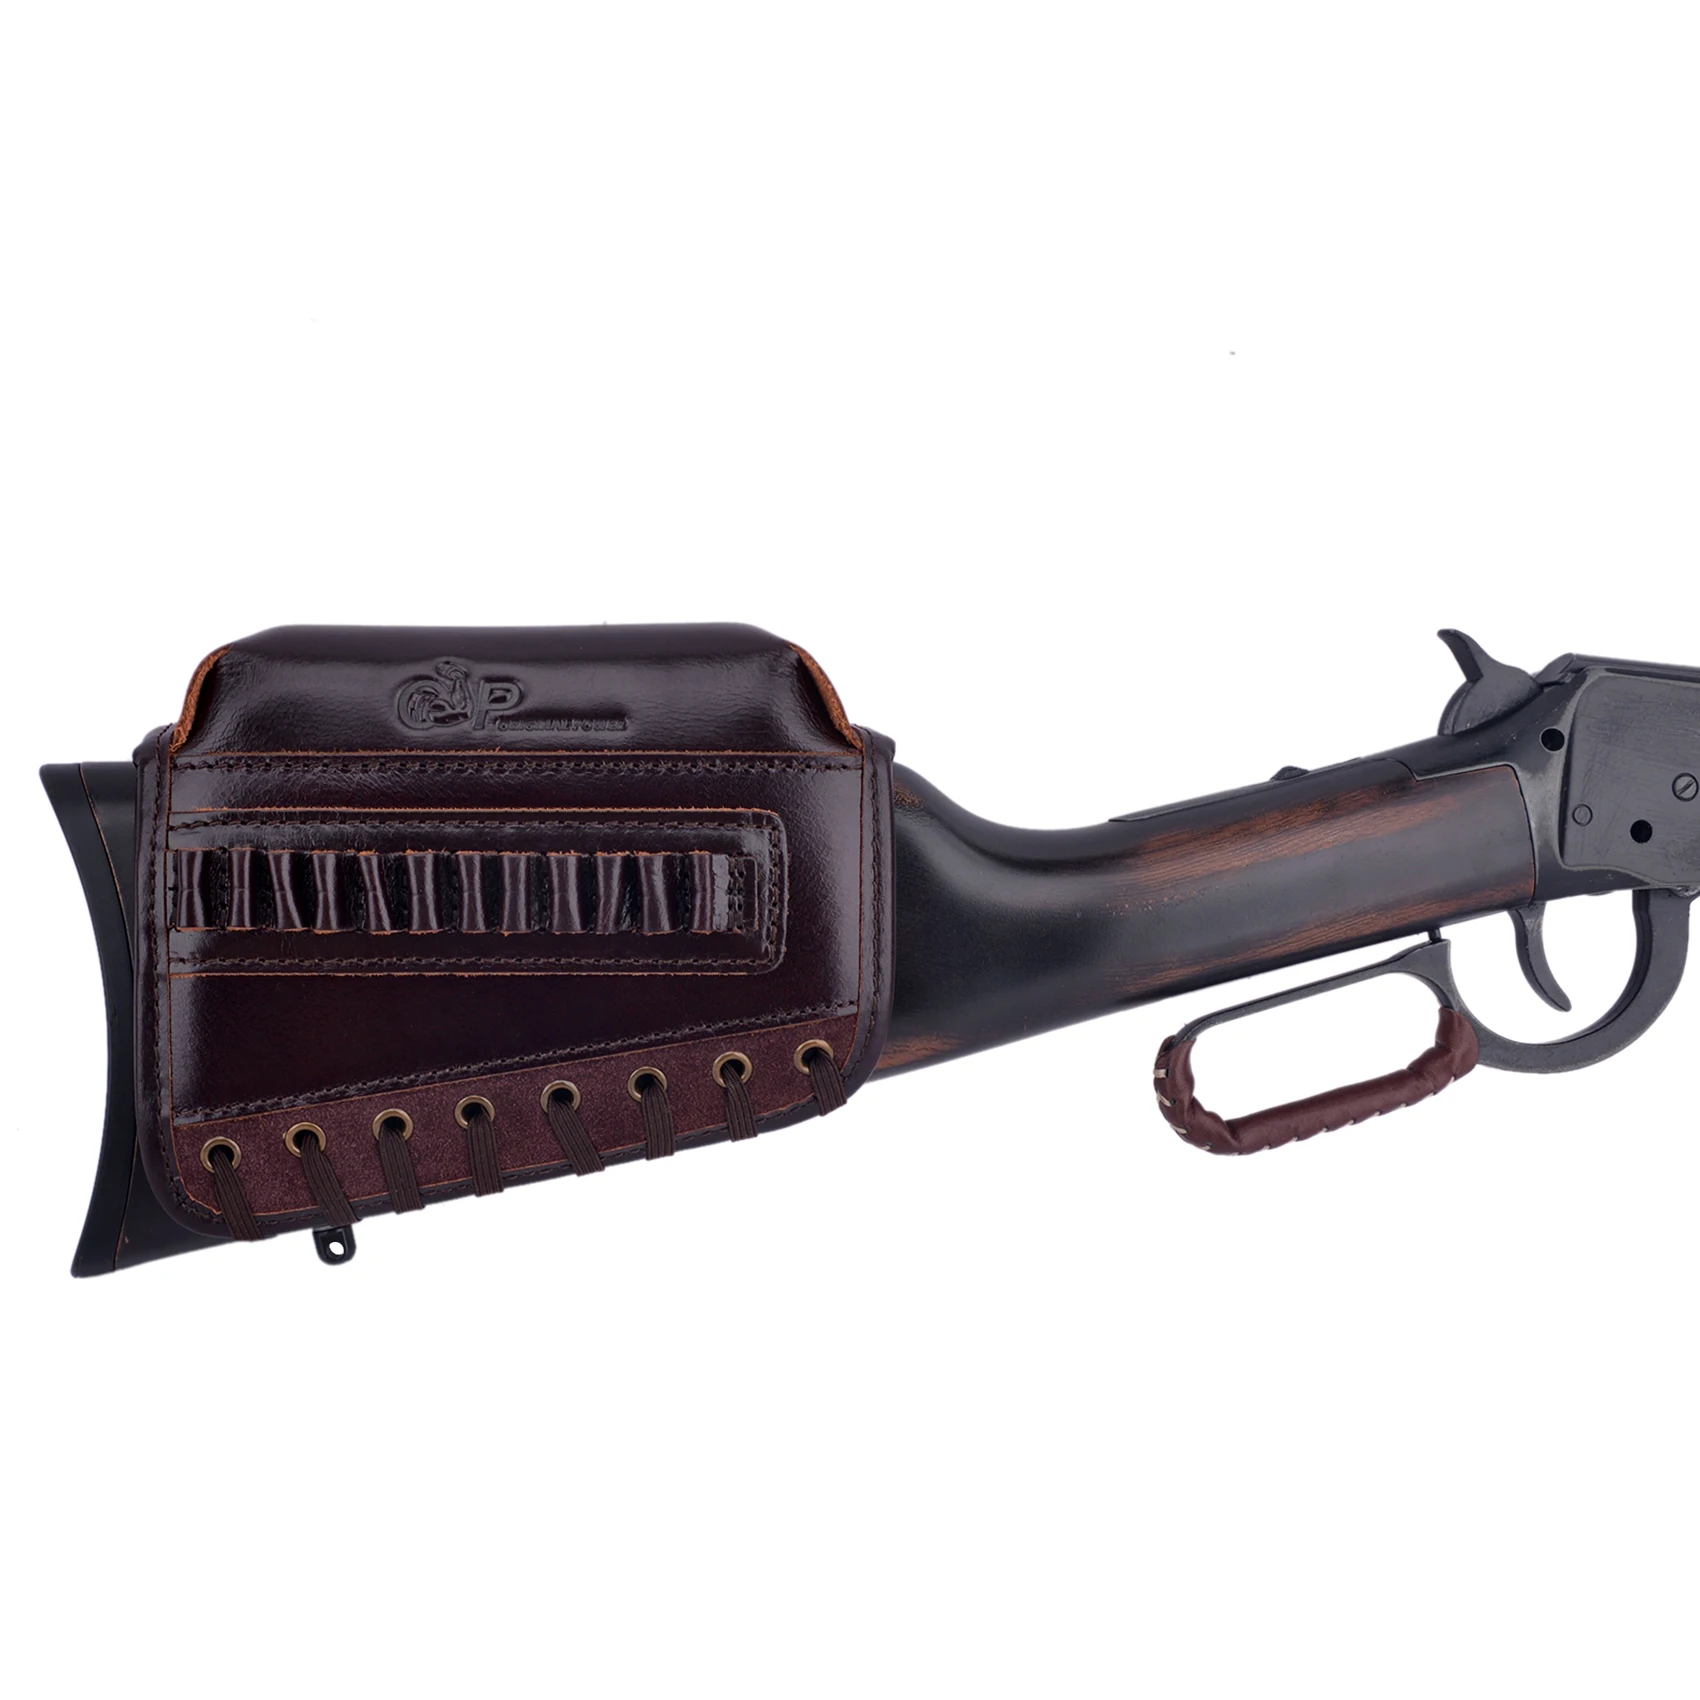 Wayne's Dog Full Grain Leather Rifle Ammo Buttstock Cheek Rest Riser Cover Ammo Pouch For .308 .30-06 .45-70 .44mag